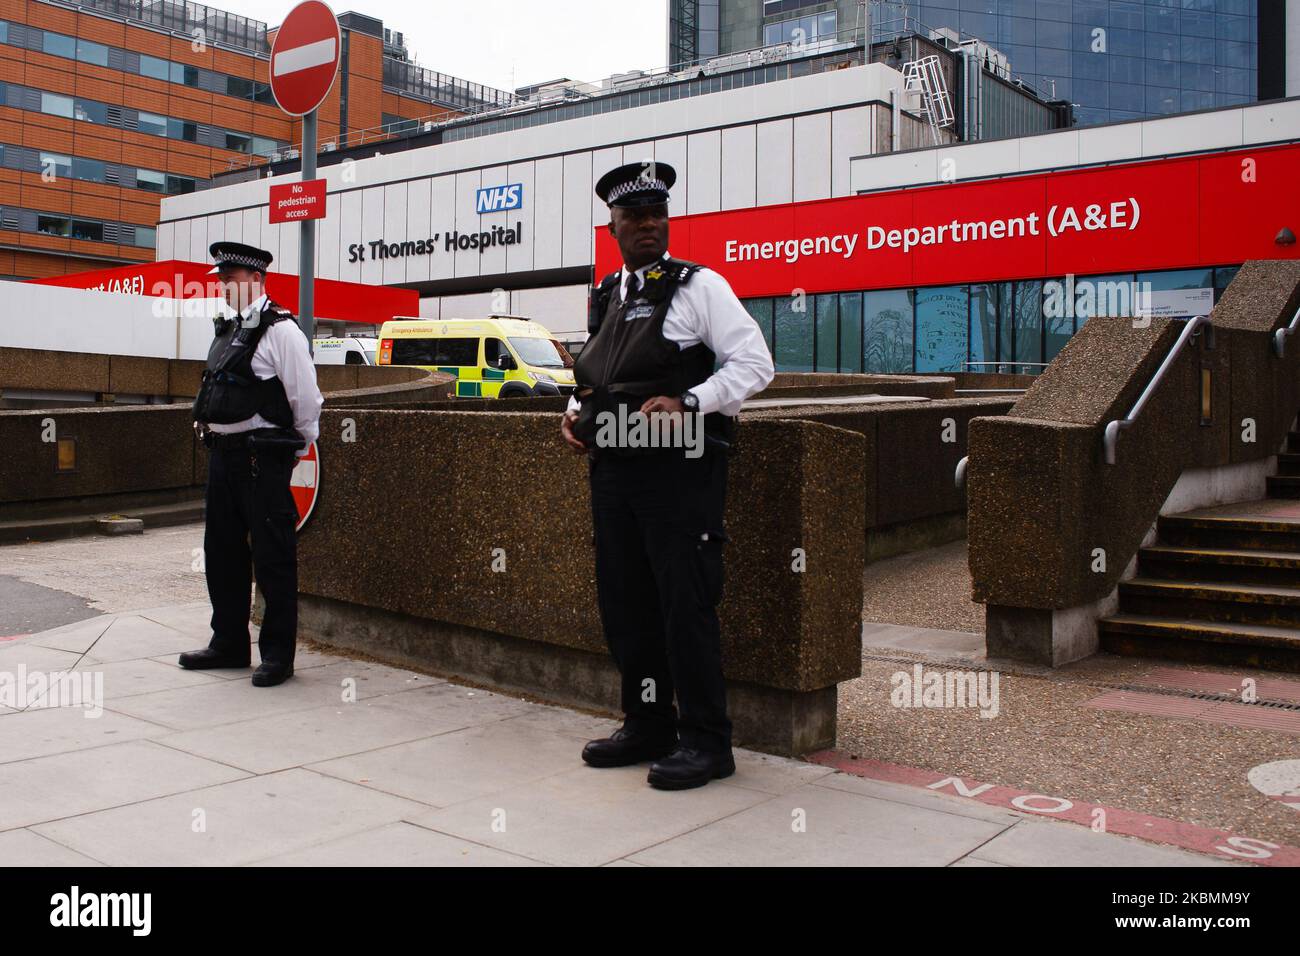 Police officers stand guard outside St Thomas' Hospital, where British Prime Minister Boris Johnson remains in intensive care with the covid-19 coronavirus, in London, England, on April 8, 2020. Johnson, 55, was admitted to the hospital on Sunday evening with what were described as 'persistent symptoms' of the novel coronavirus. He was moved to intensive care on Monday night after his condition was said to have 'worsened'. Chancellor of the Exchequer Rishi Sunak informed the country today, however, that the prime minister was now improving, sitting up and 'engaging positively' with the medical Stock Photo